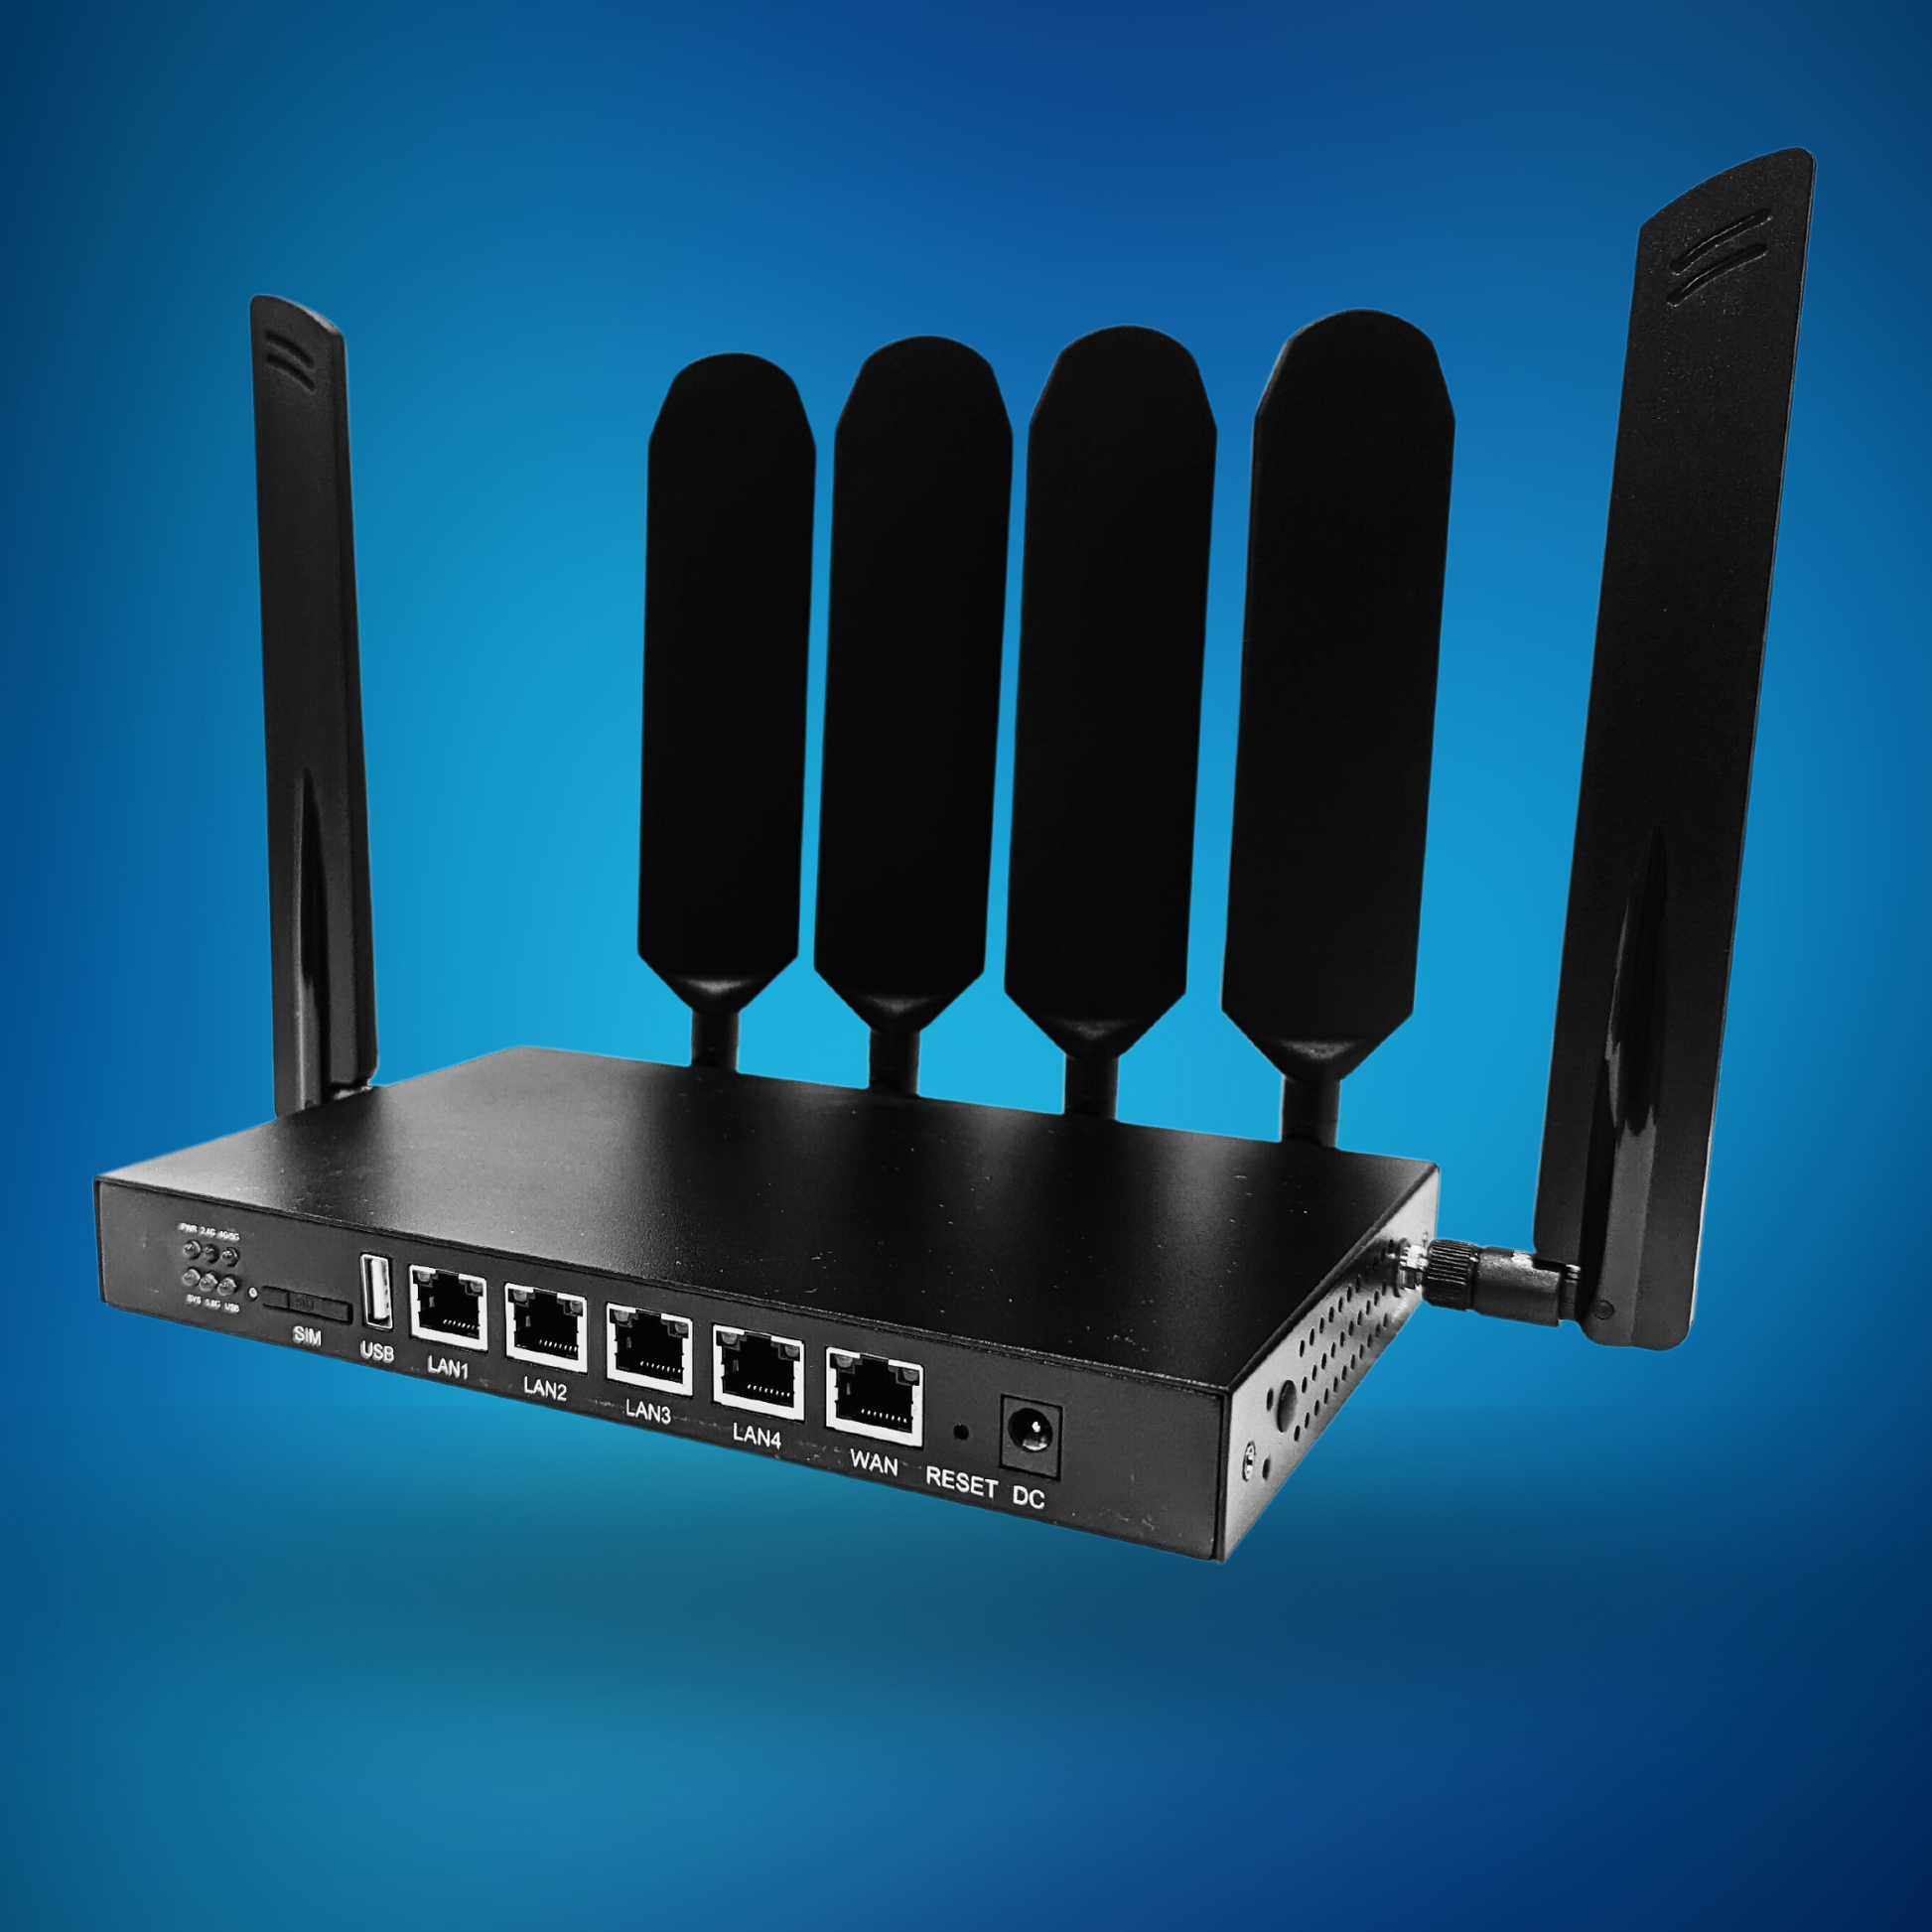 5G/4G LTE CAT19 Unlocked Dual-Band OpenWrt Wireless Router